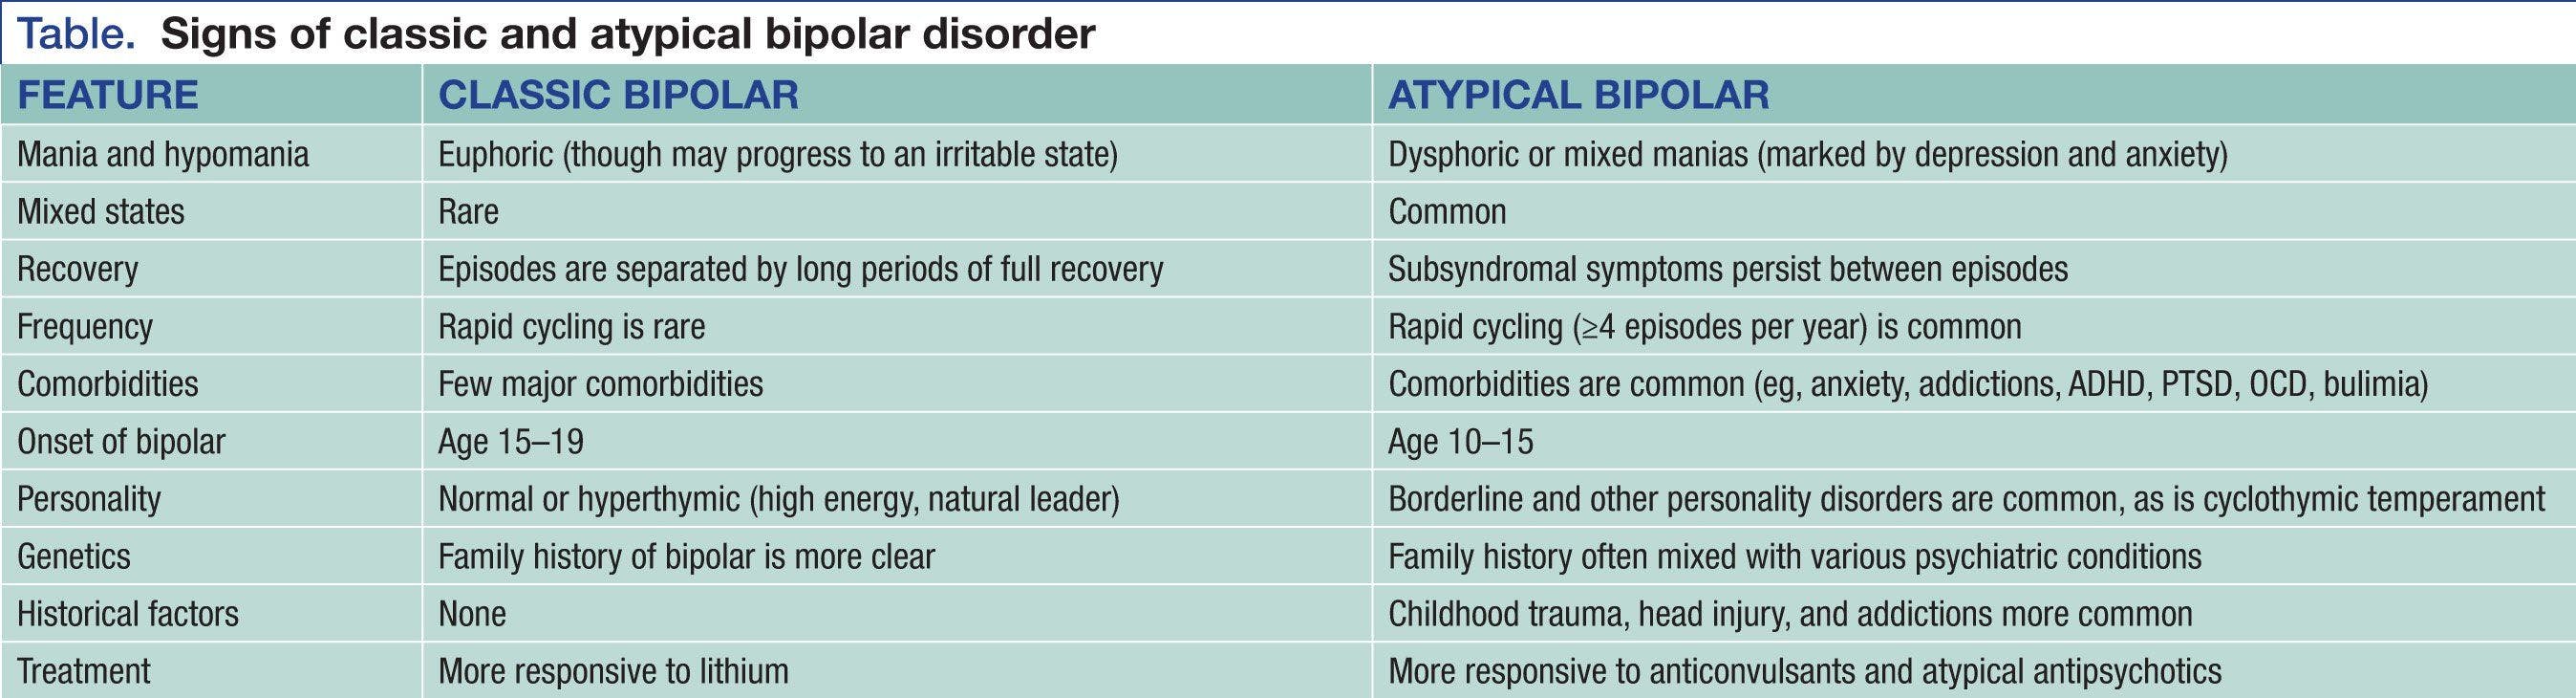 Signs of classic and atypical bipolar disorder